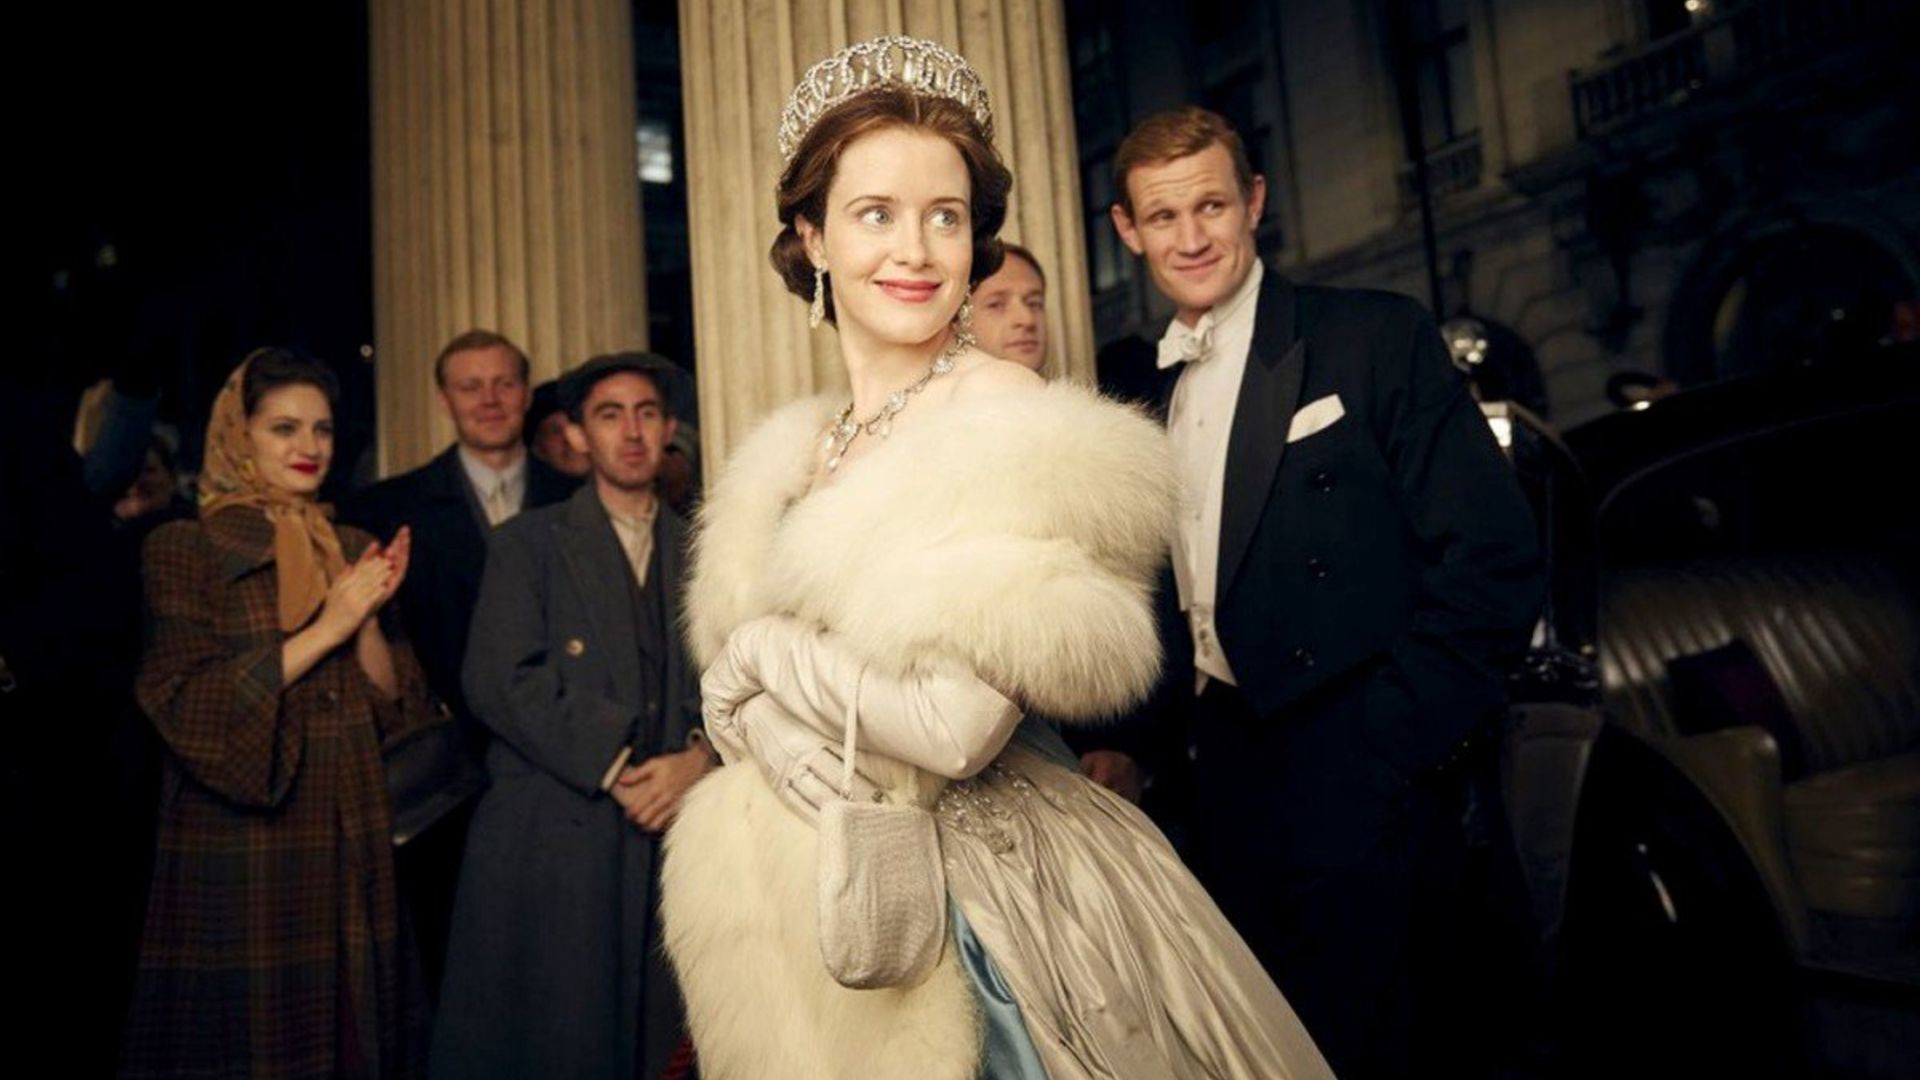 The Crown – one of the best Netflix shows to watch right now